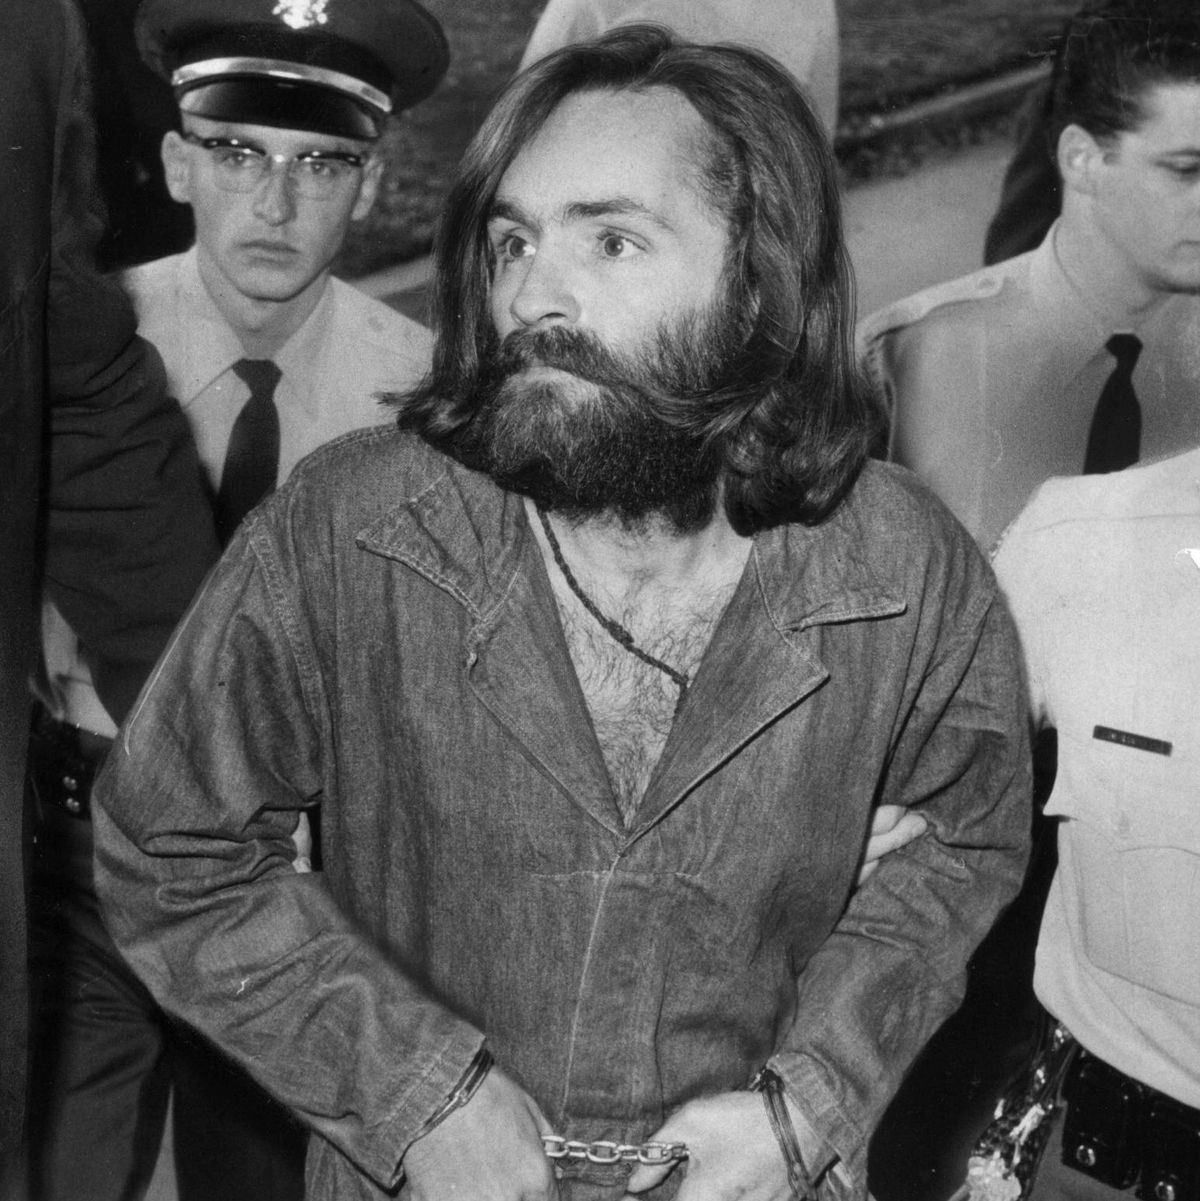 Charles Manson: The True Story of the Manson Family and the Manson Murders